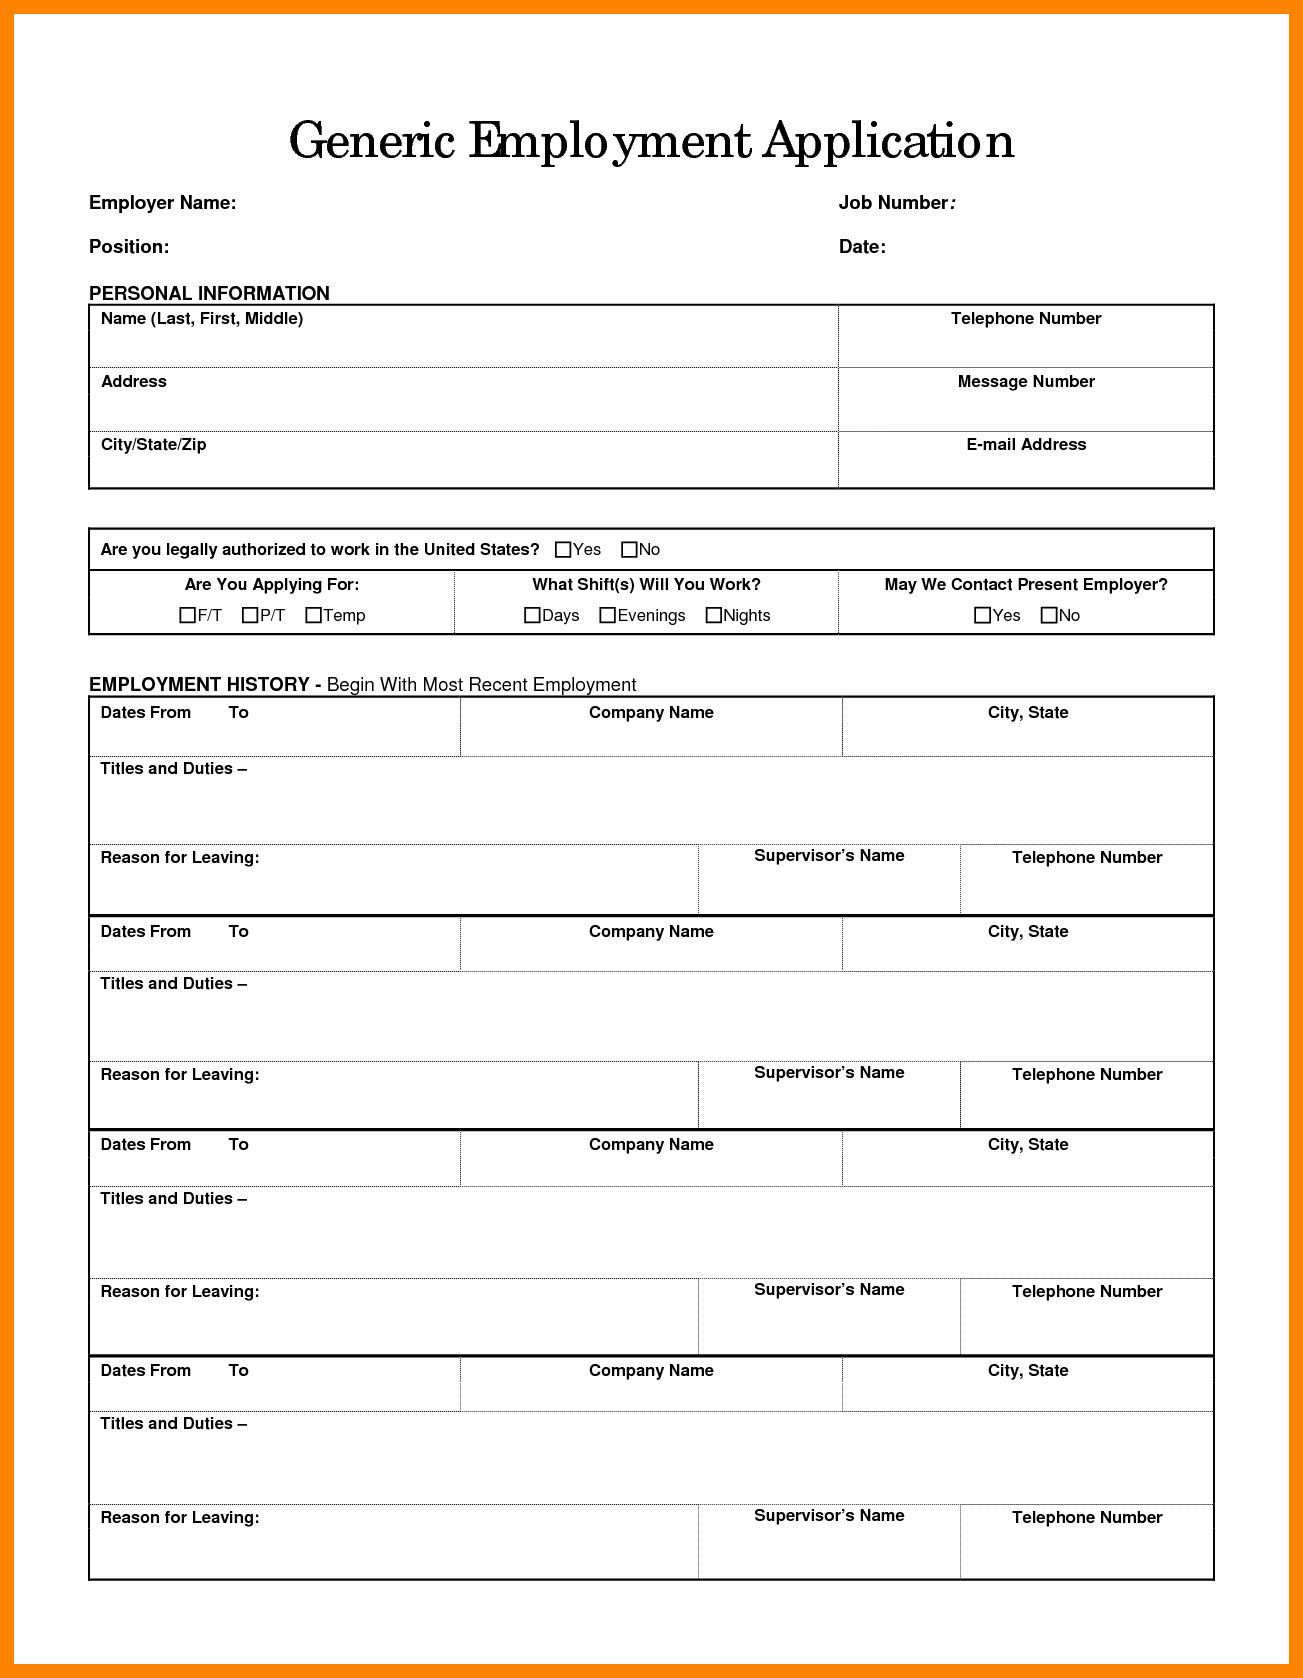 Free Employment Application form Download Fresh Generic Job Application form Free Download Freemium